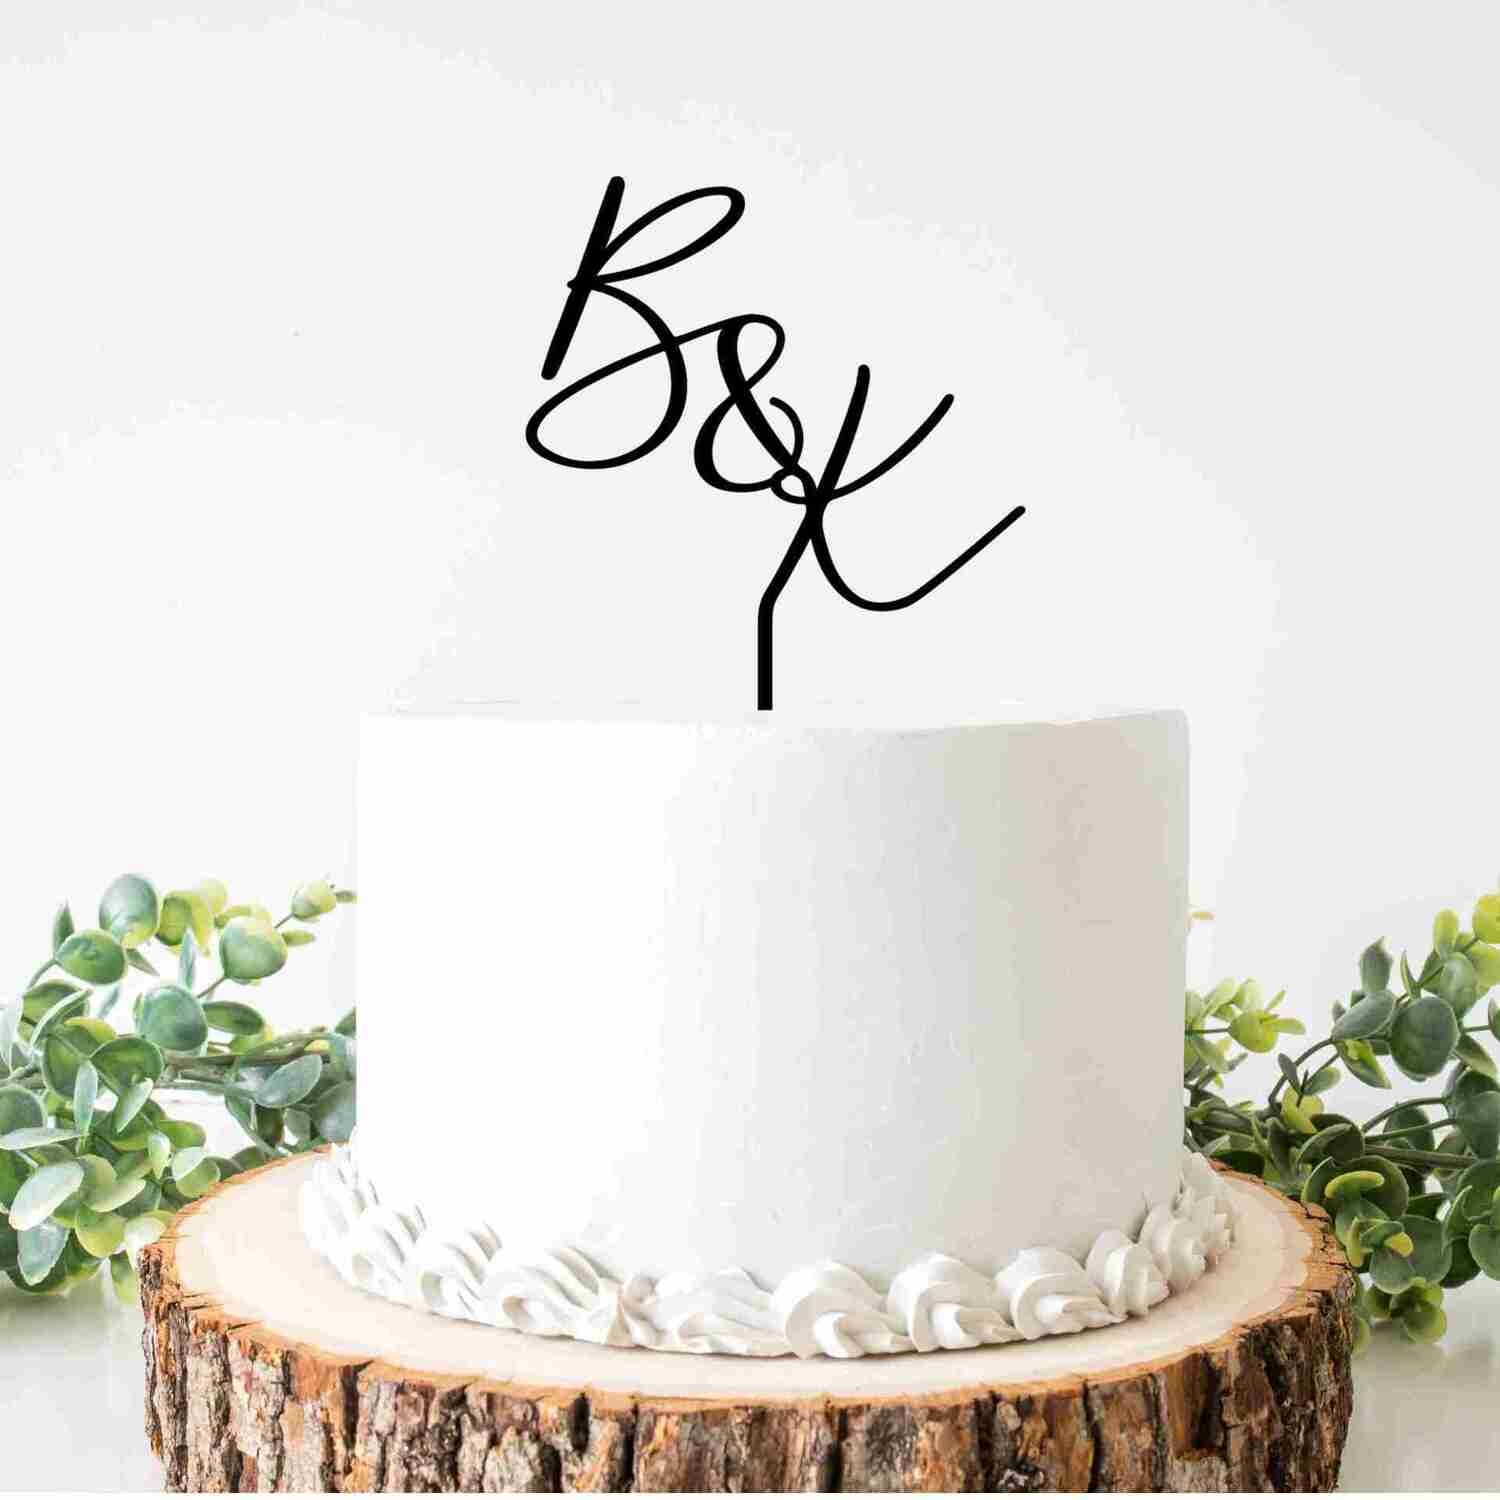 Personalised Initials wedding cake topper